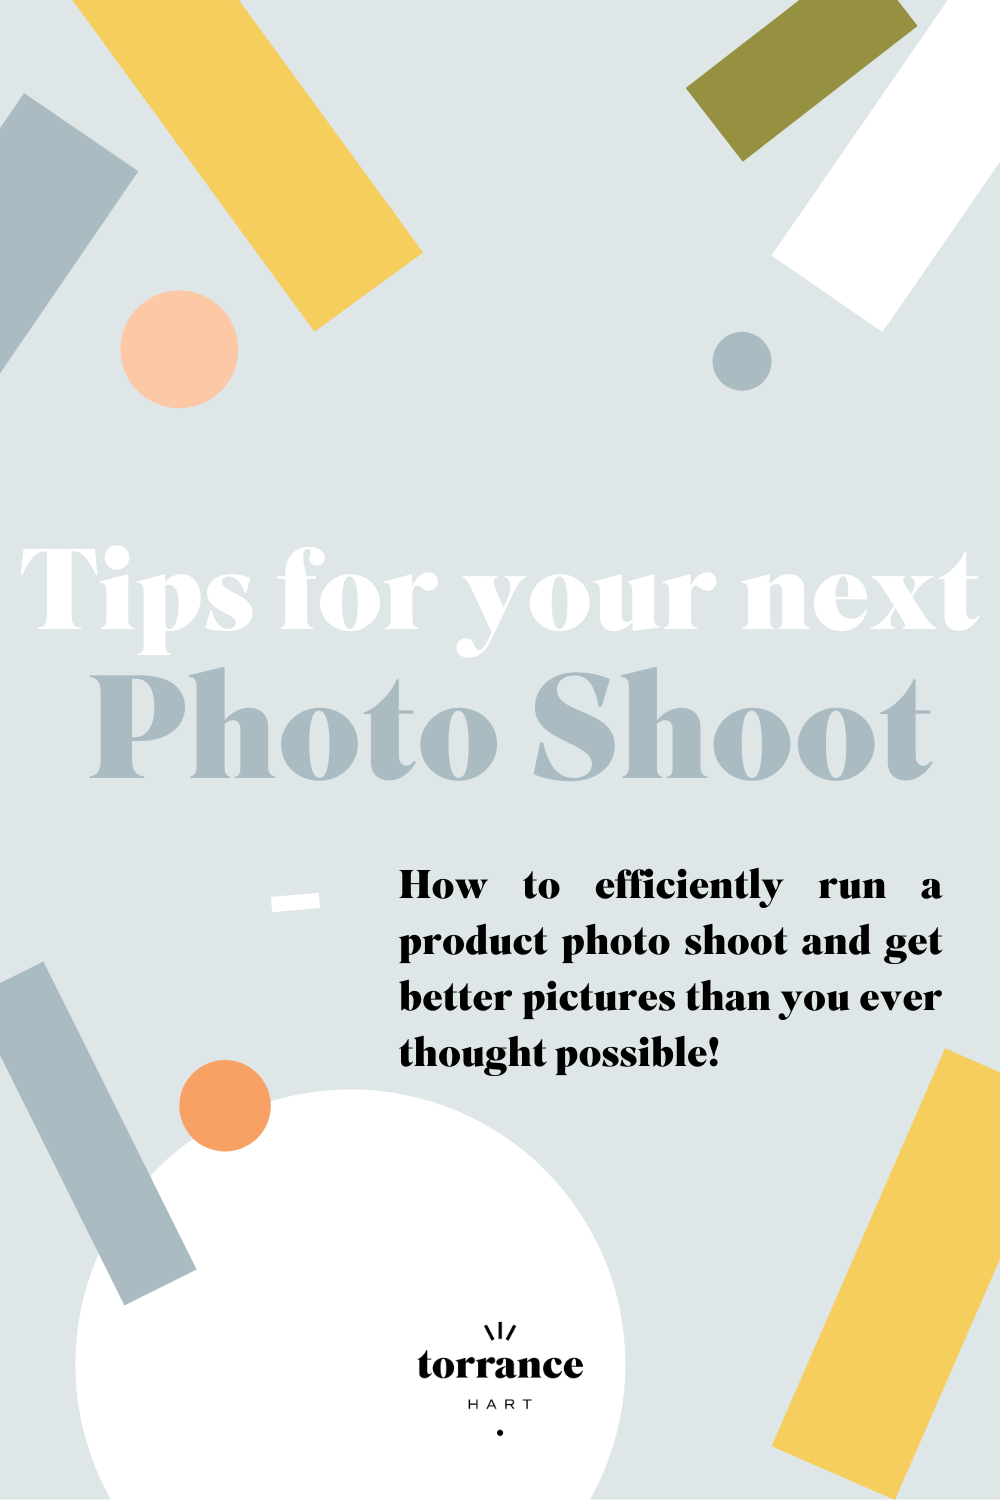 Tips for a great product photo shoot